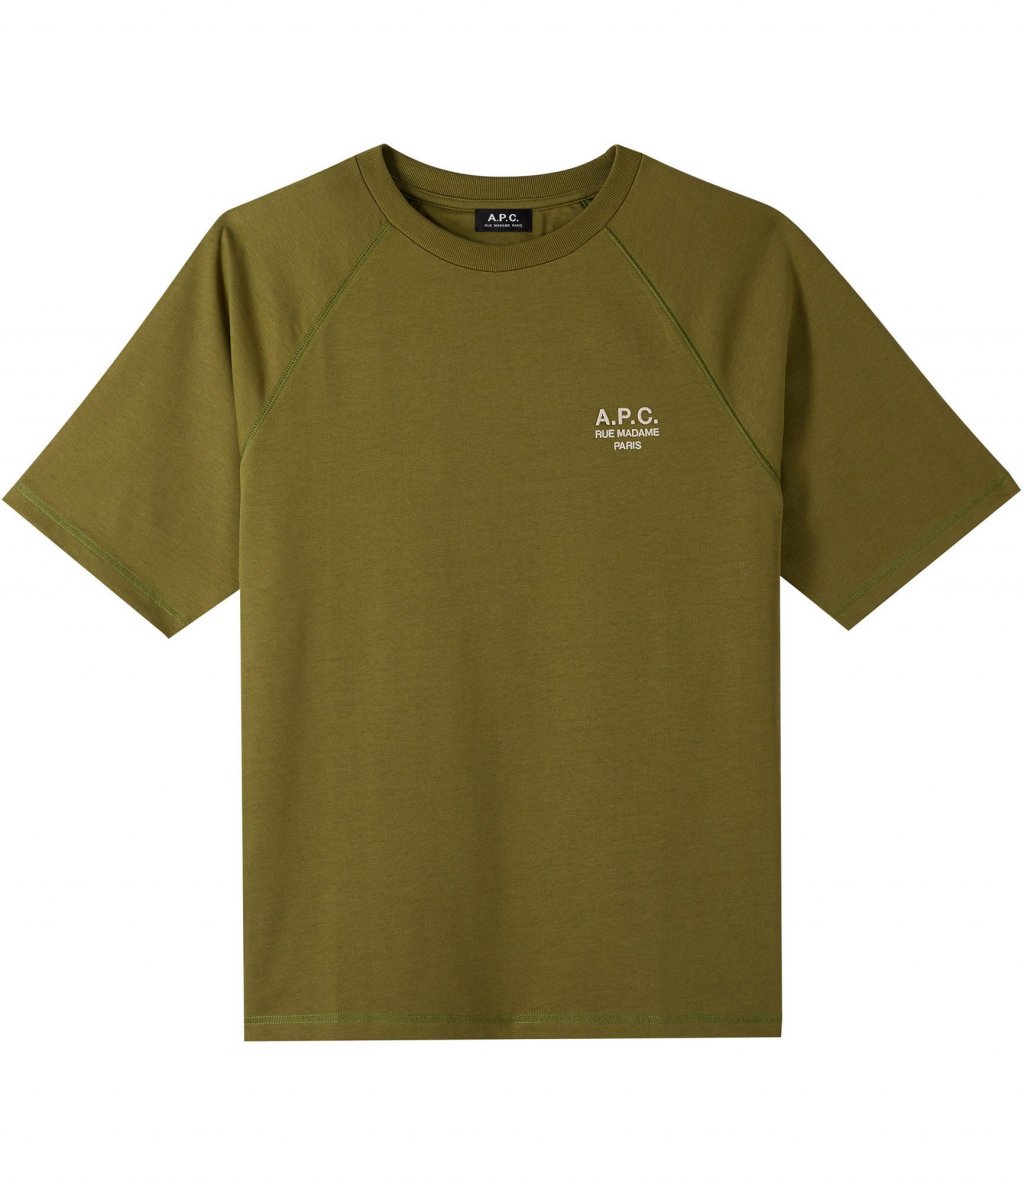 Khaki Willy T-shirt by A.P.C.